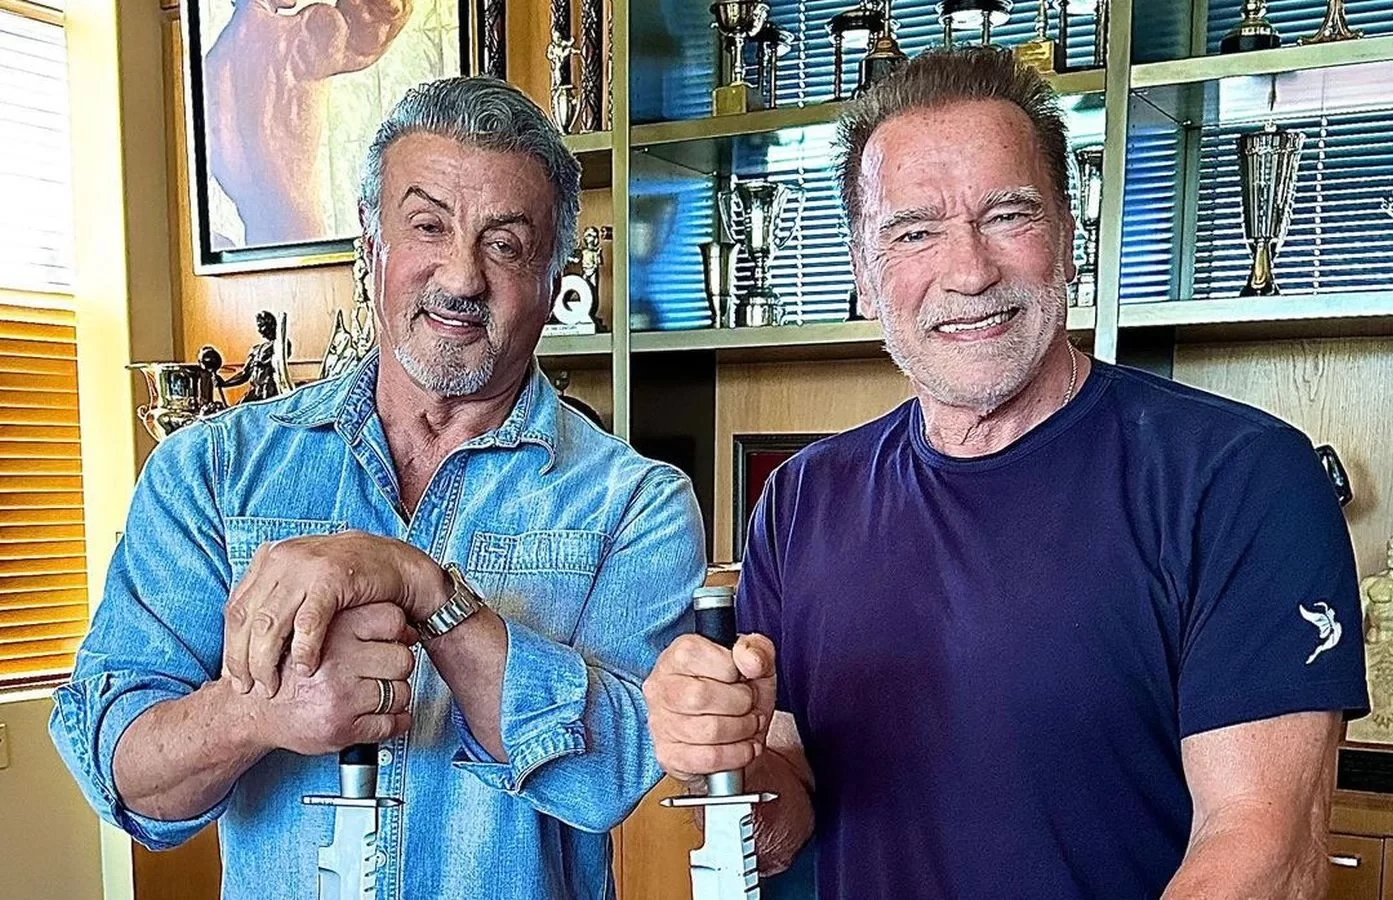 Sylvester Stallone and Arnold Schwarzenegger in a recent pic together